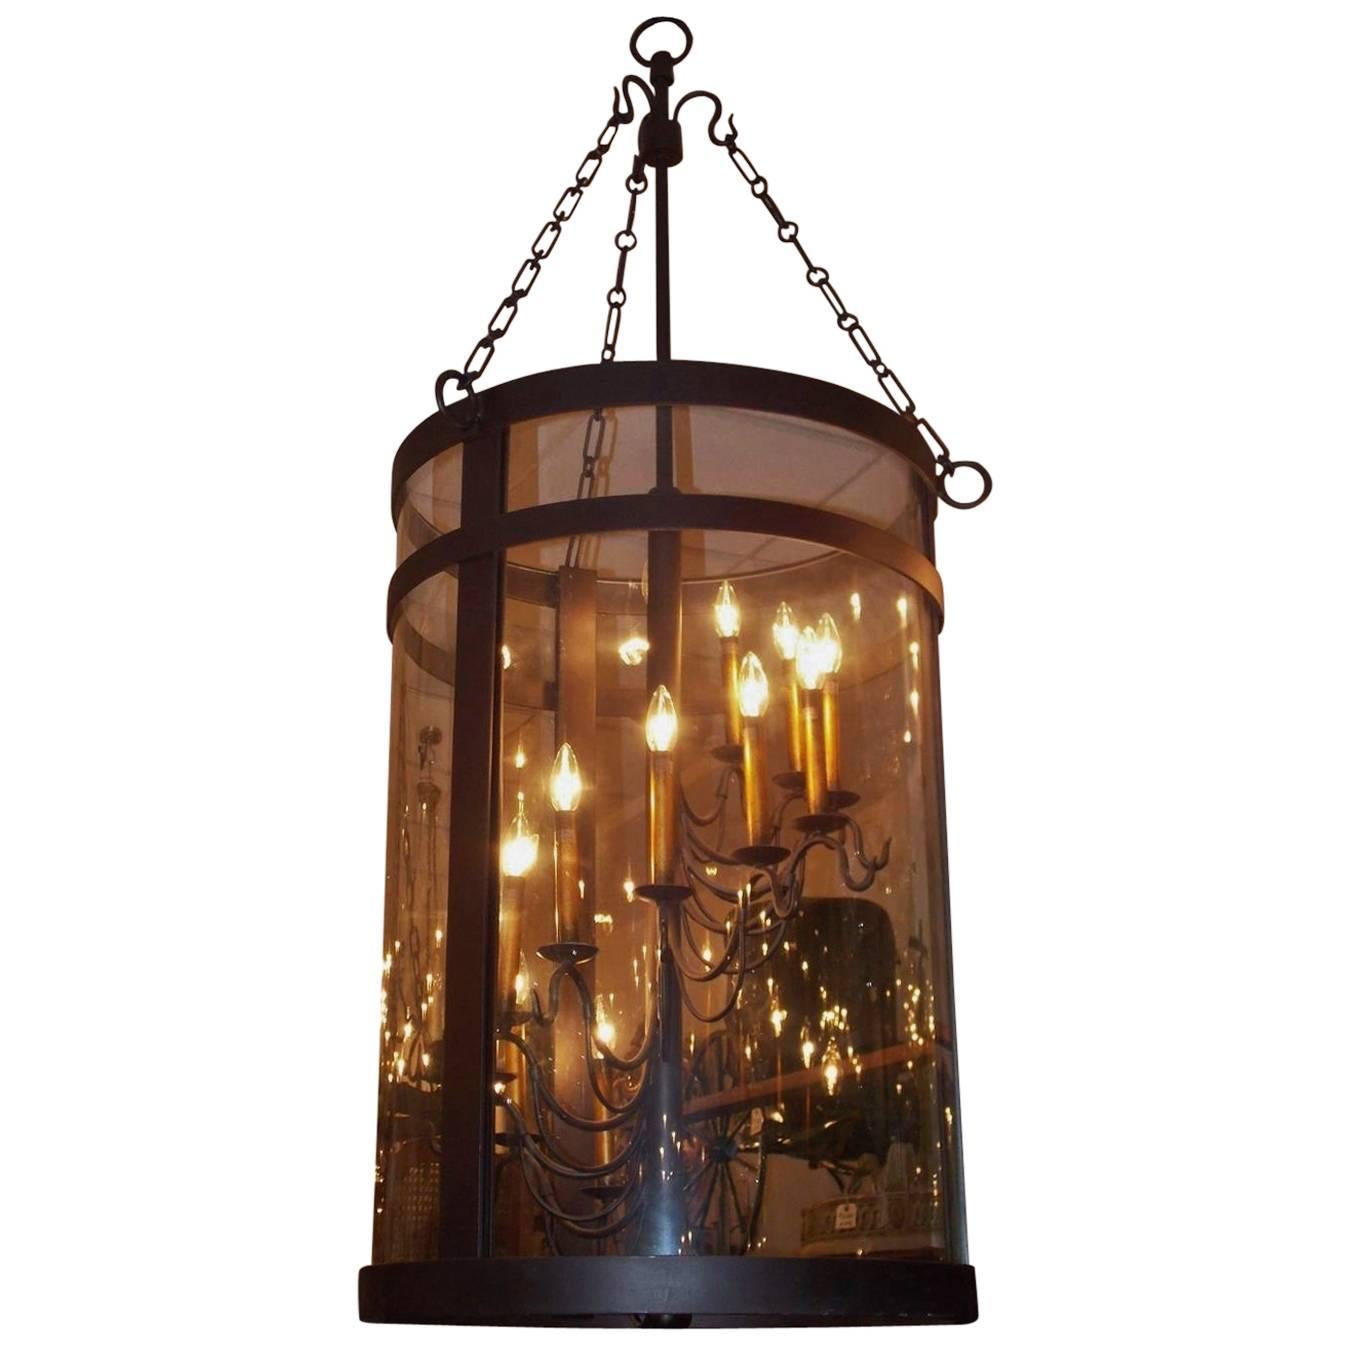 American Cast Iron Cylinder Hanging Glass Lantern, Early 20th Century